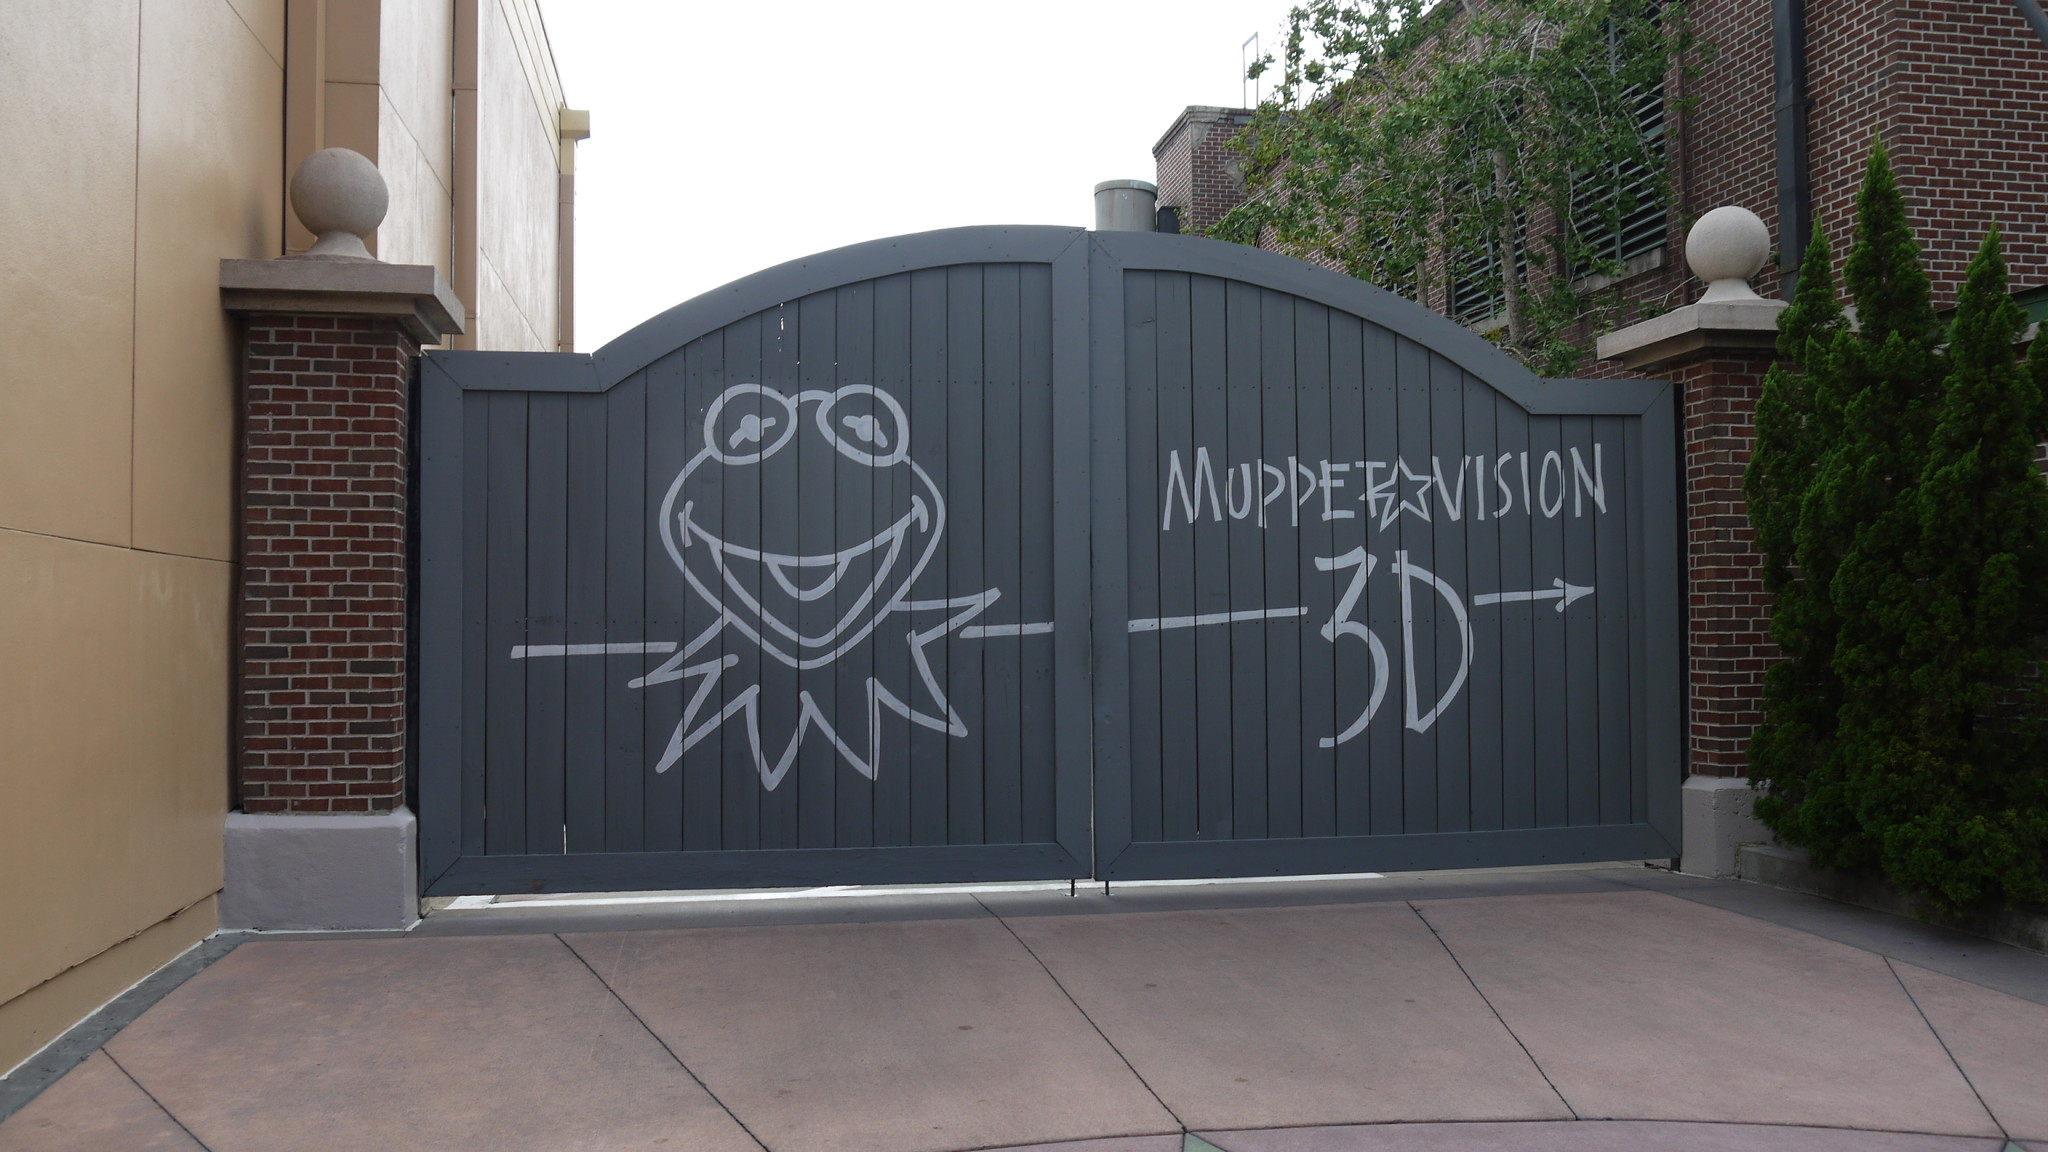 MuppetVision 3D and Mama Melrose Ristorante Italiano get a new name together